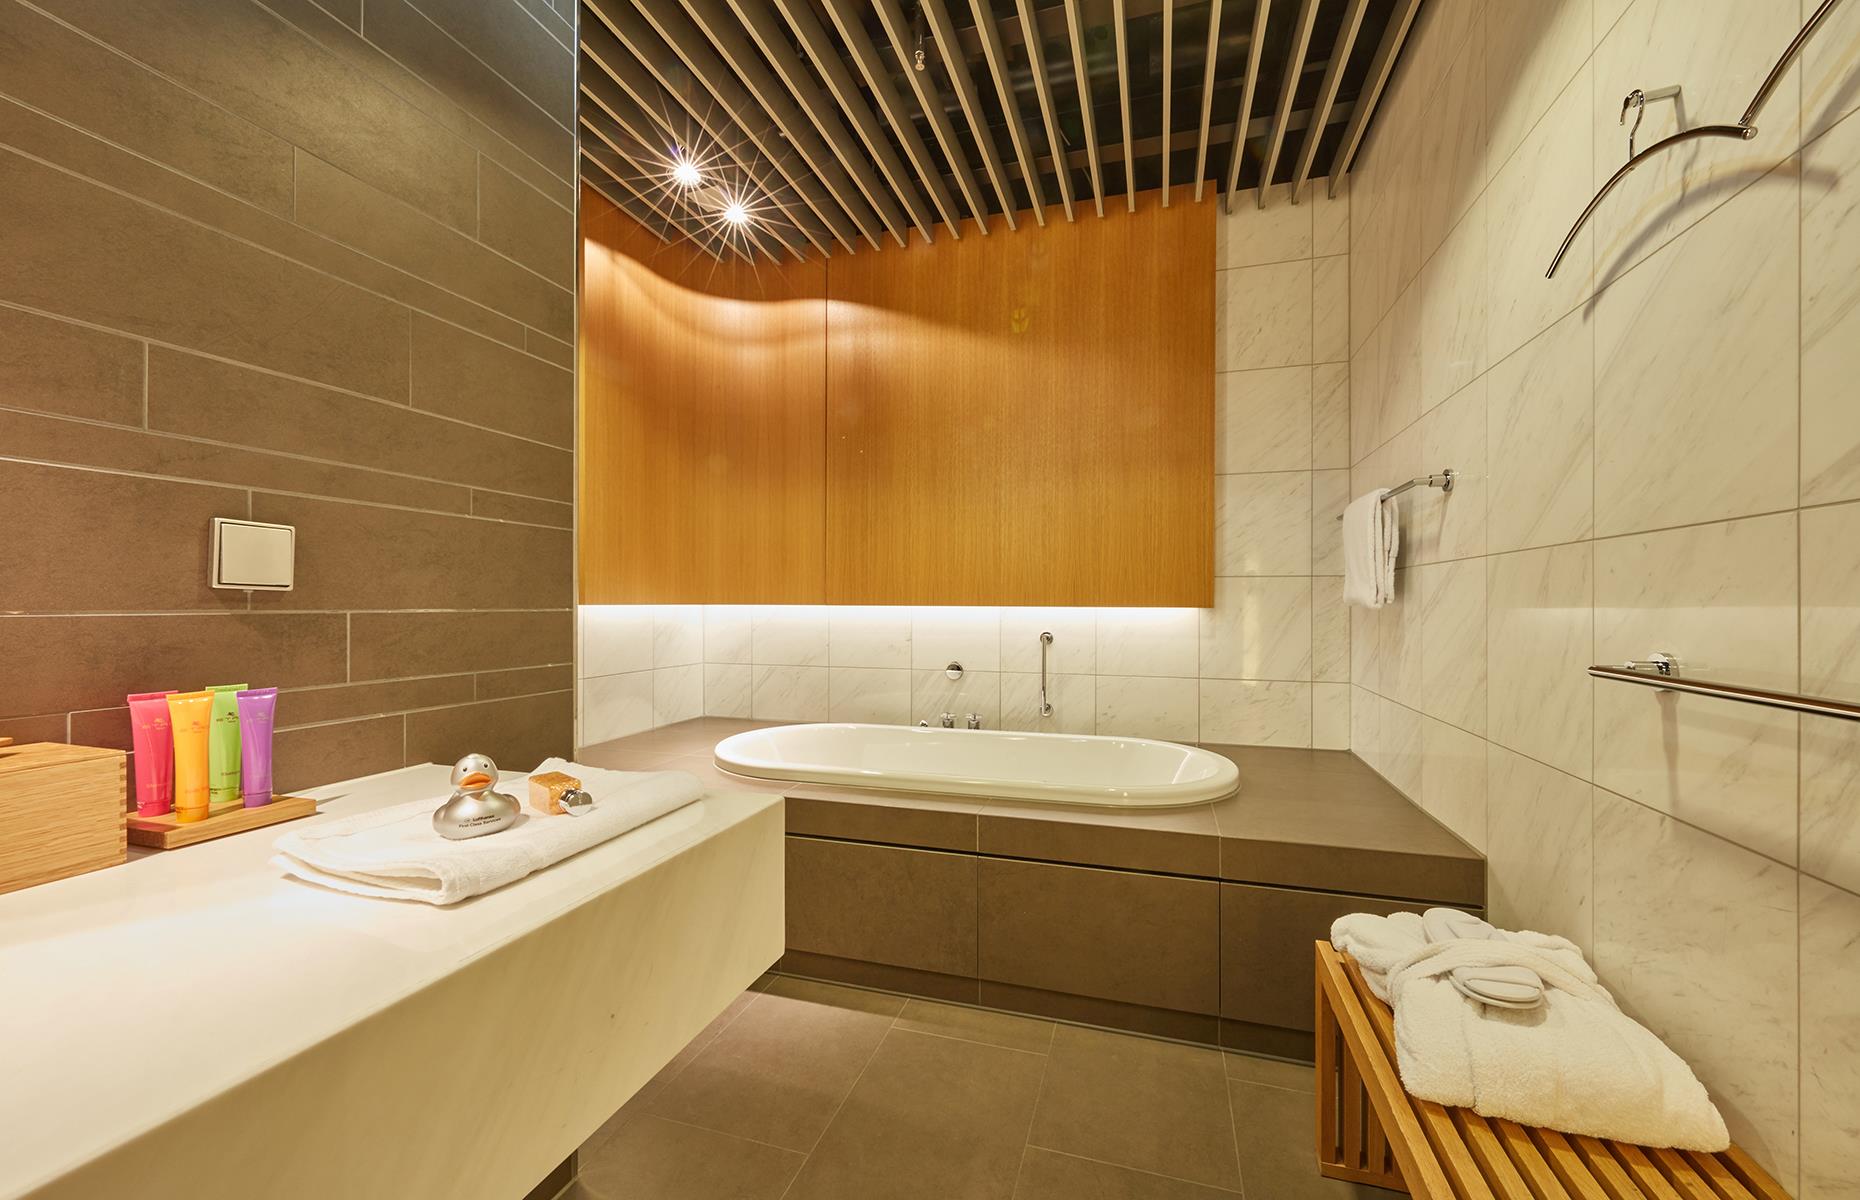 <p>There are nap rooms where you can snooze on a proper bed with white sheets and a pillow, plus fantastic bathrooms where you can have a soak and enjoy some of the luxury toiletries.</p>